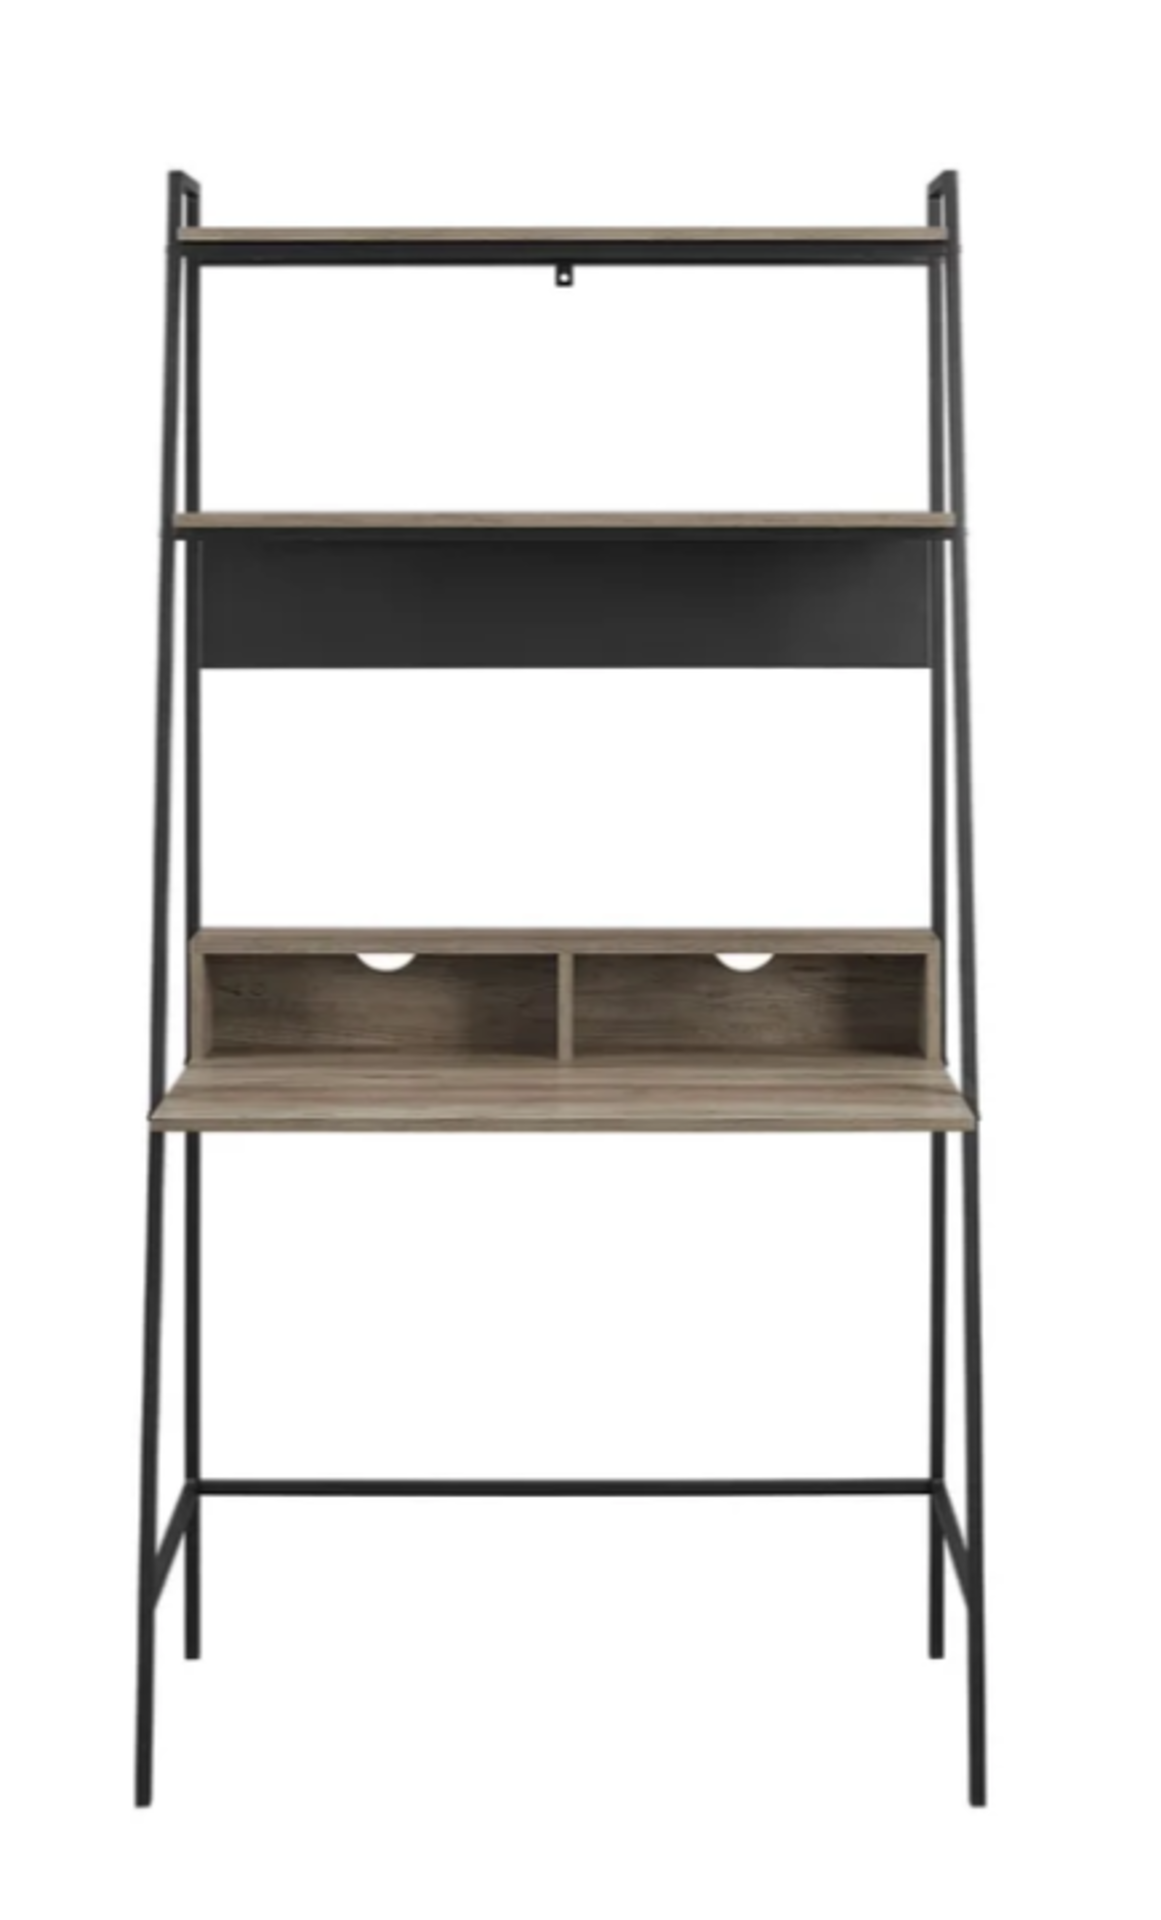 Walburg Ladder Desk. RRP £229.99. Work in style at this ladder desk, which is brimming with urban - Image 2 of 2